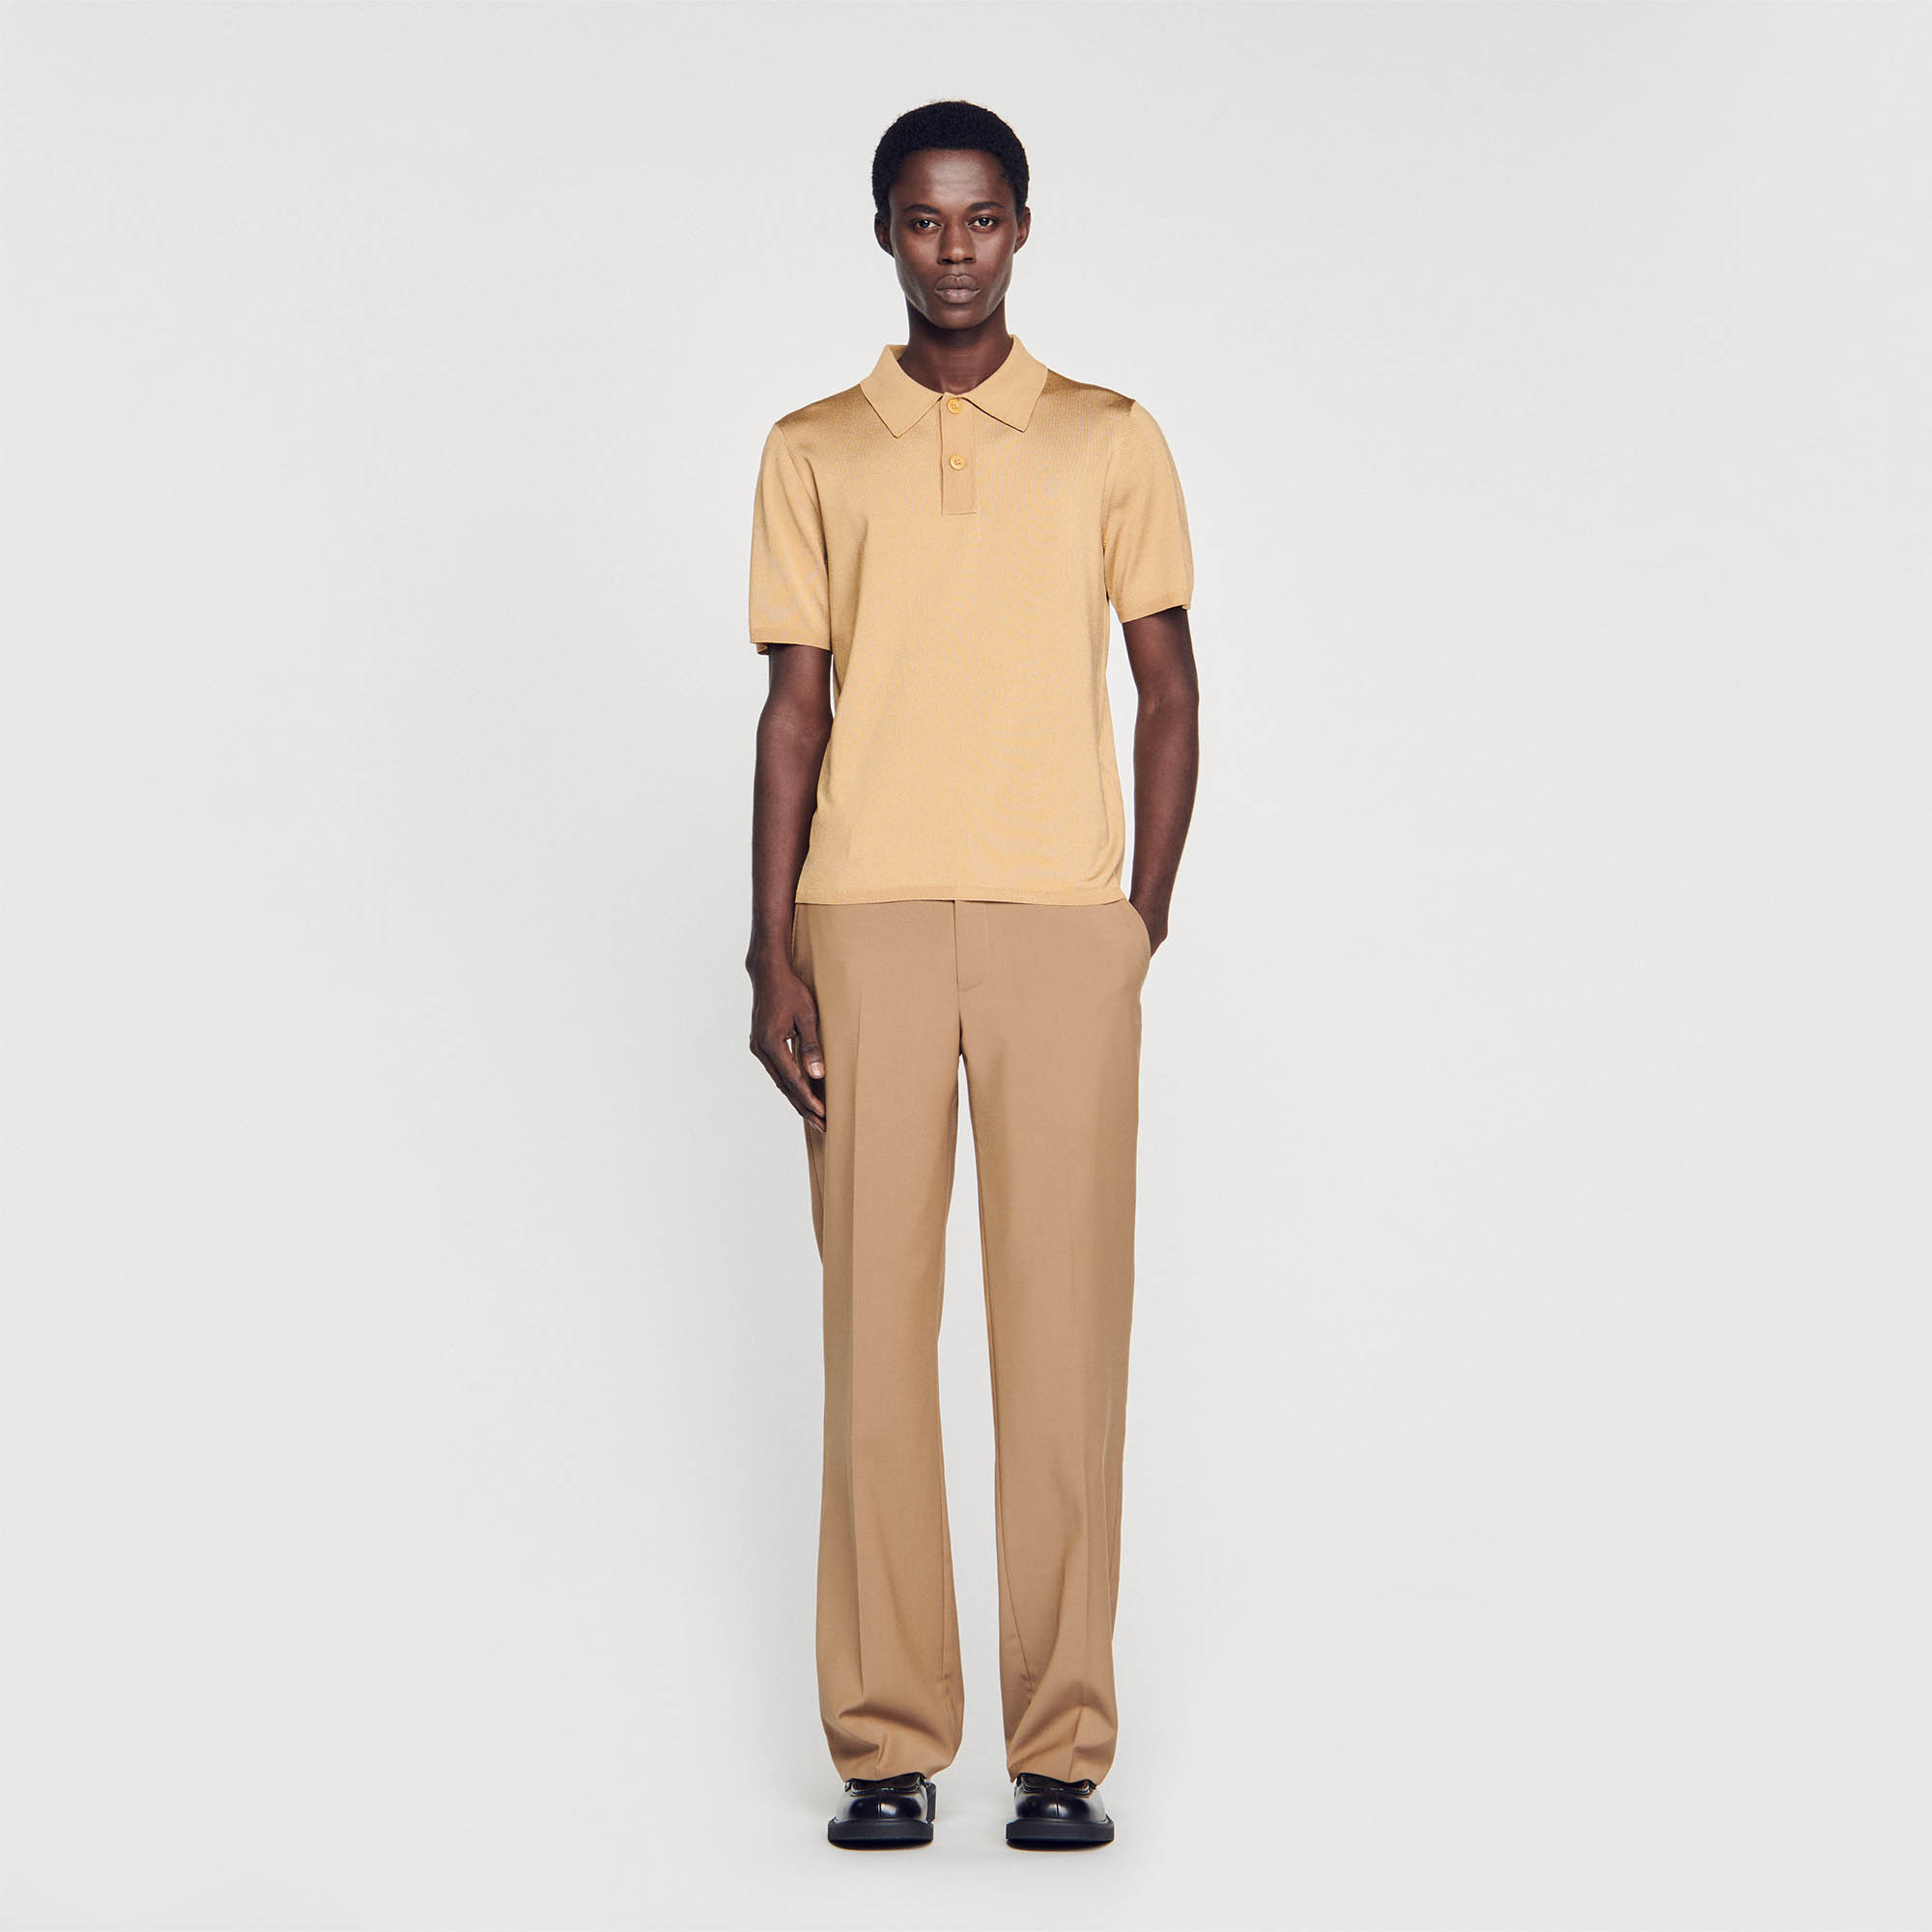 Sandro acetate Knitted polo shirt with a button-up collar and short sleeves